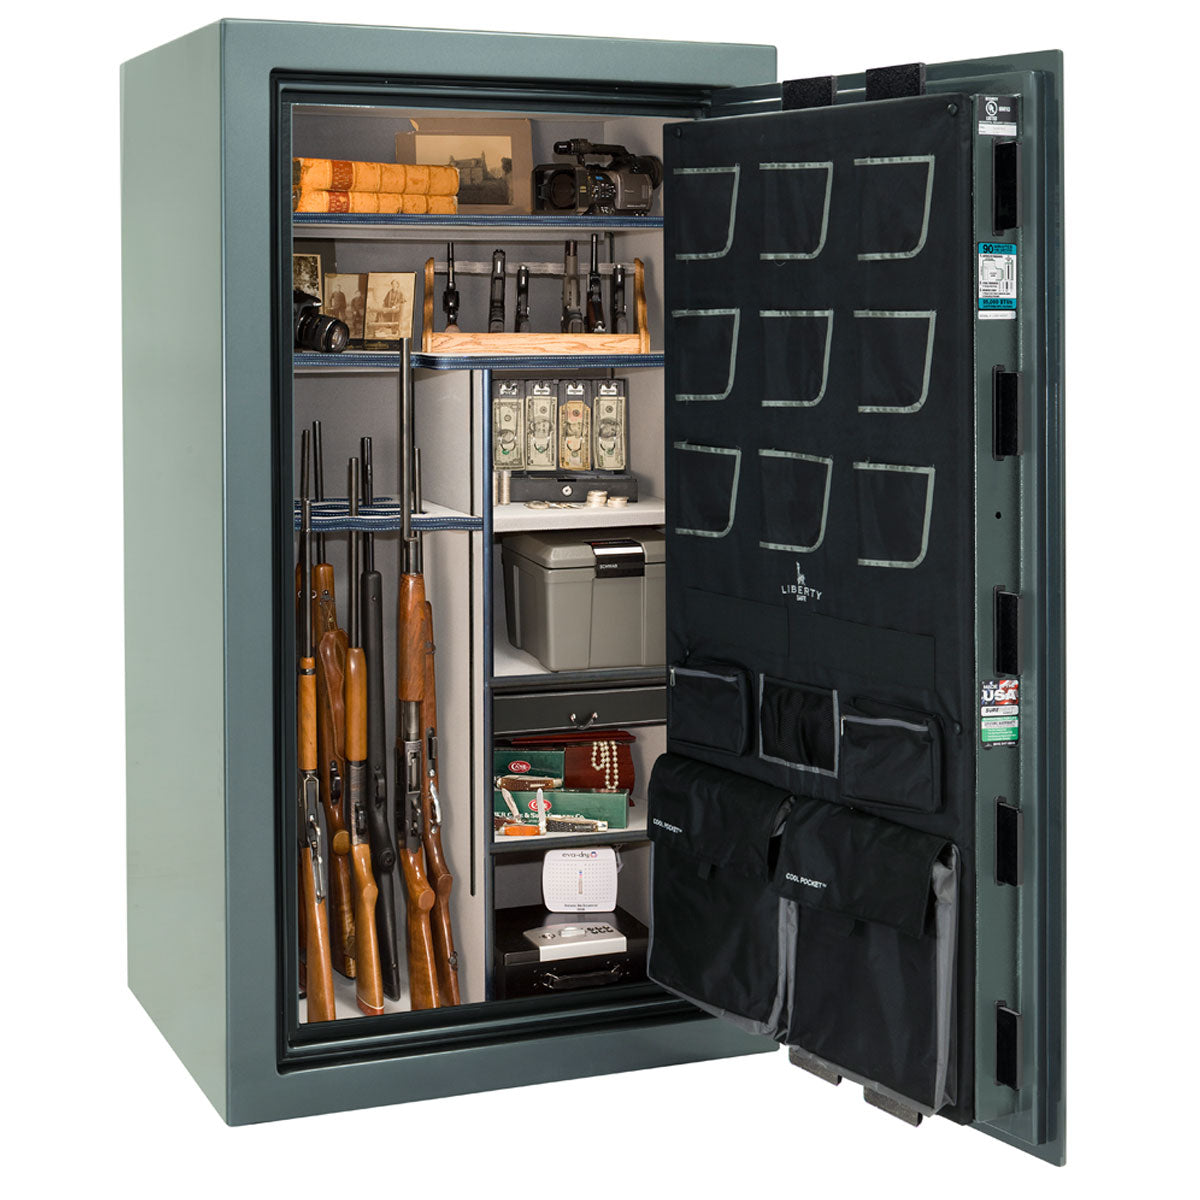 Liberty Safe Classic Plus 40 in Forest Mist Gloss, open door.